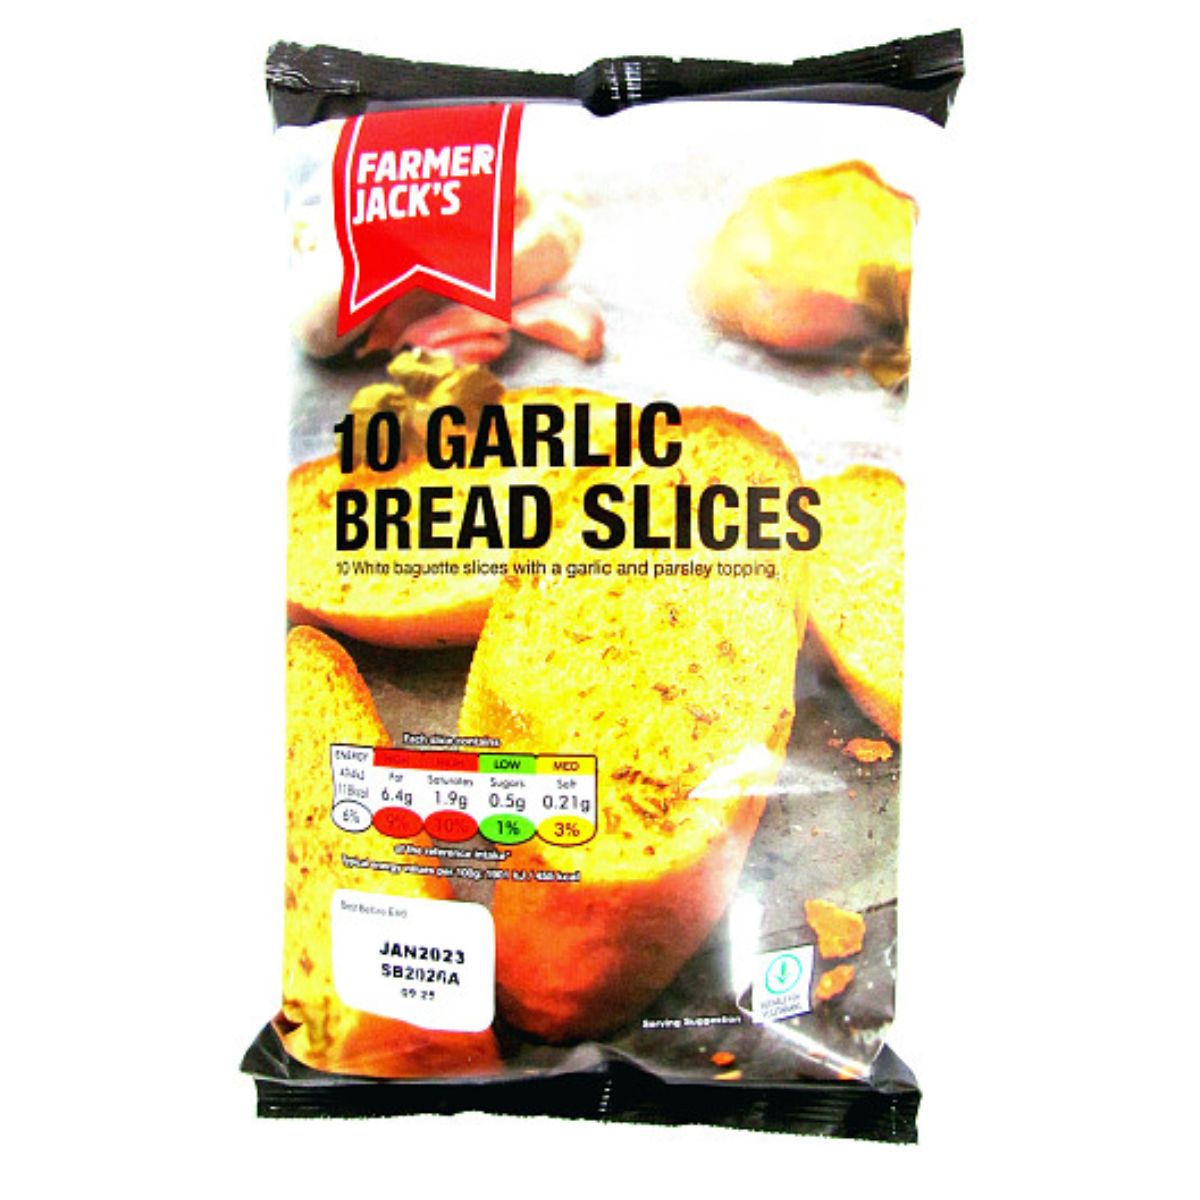 Package of Farmer Jacks - Garlic Bread Slices 10pcs - 210g, showing baguette slices with garlic and parsley topping.